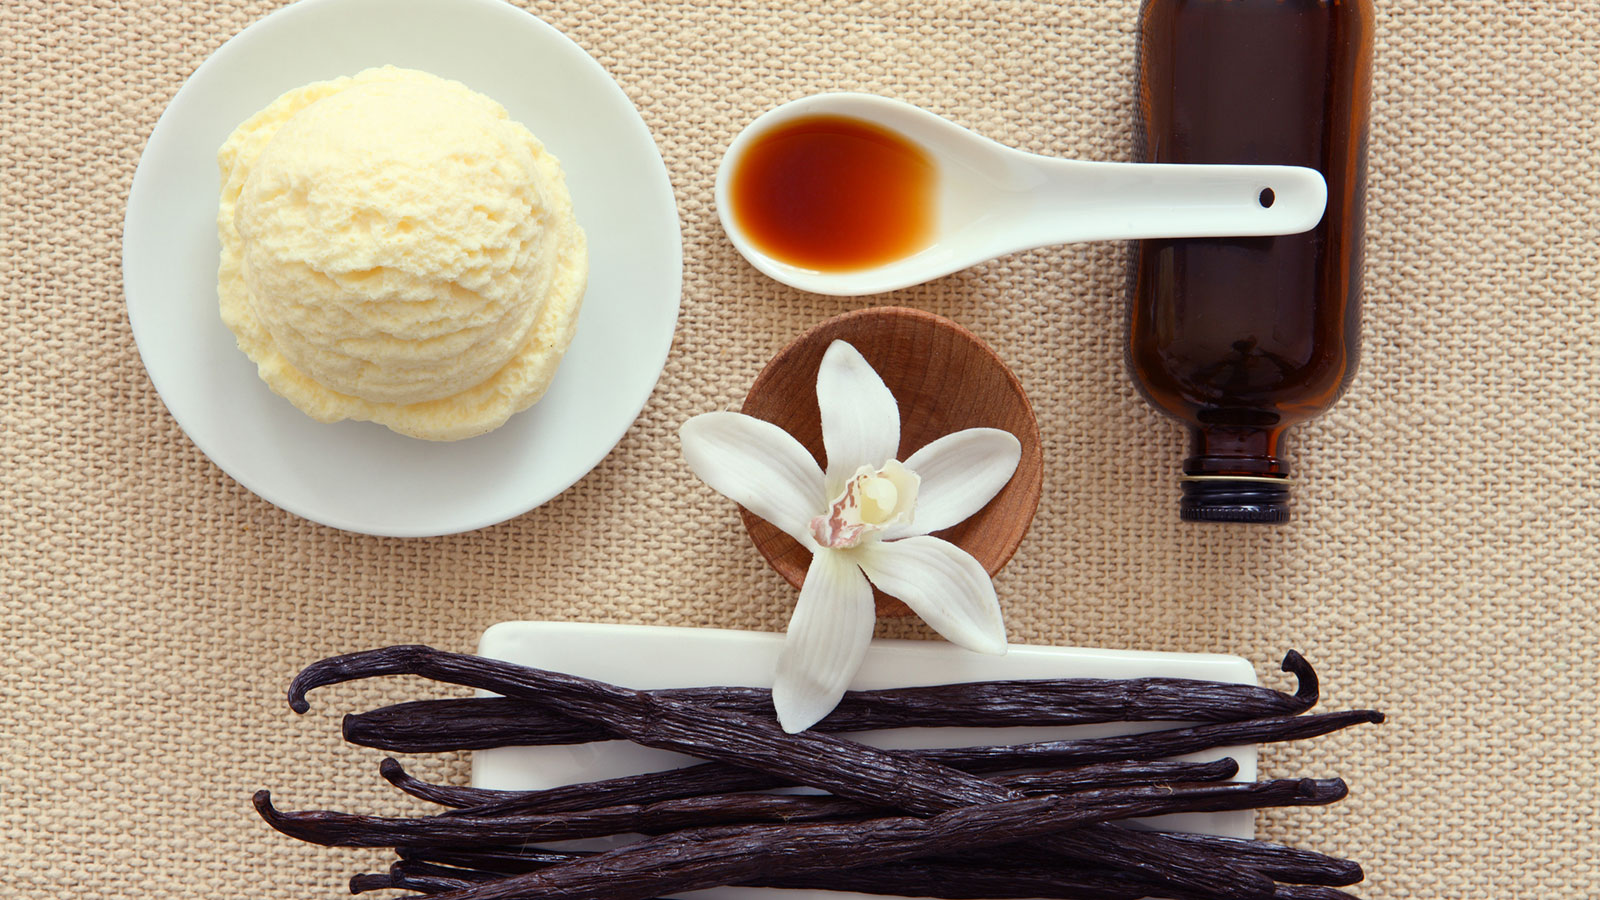 💖 If You Like Eating 27/35 of These Aphrodisiacs, You’re a 🥰 Real Romantic Vanilla